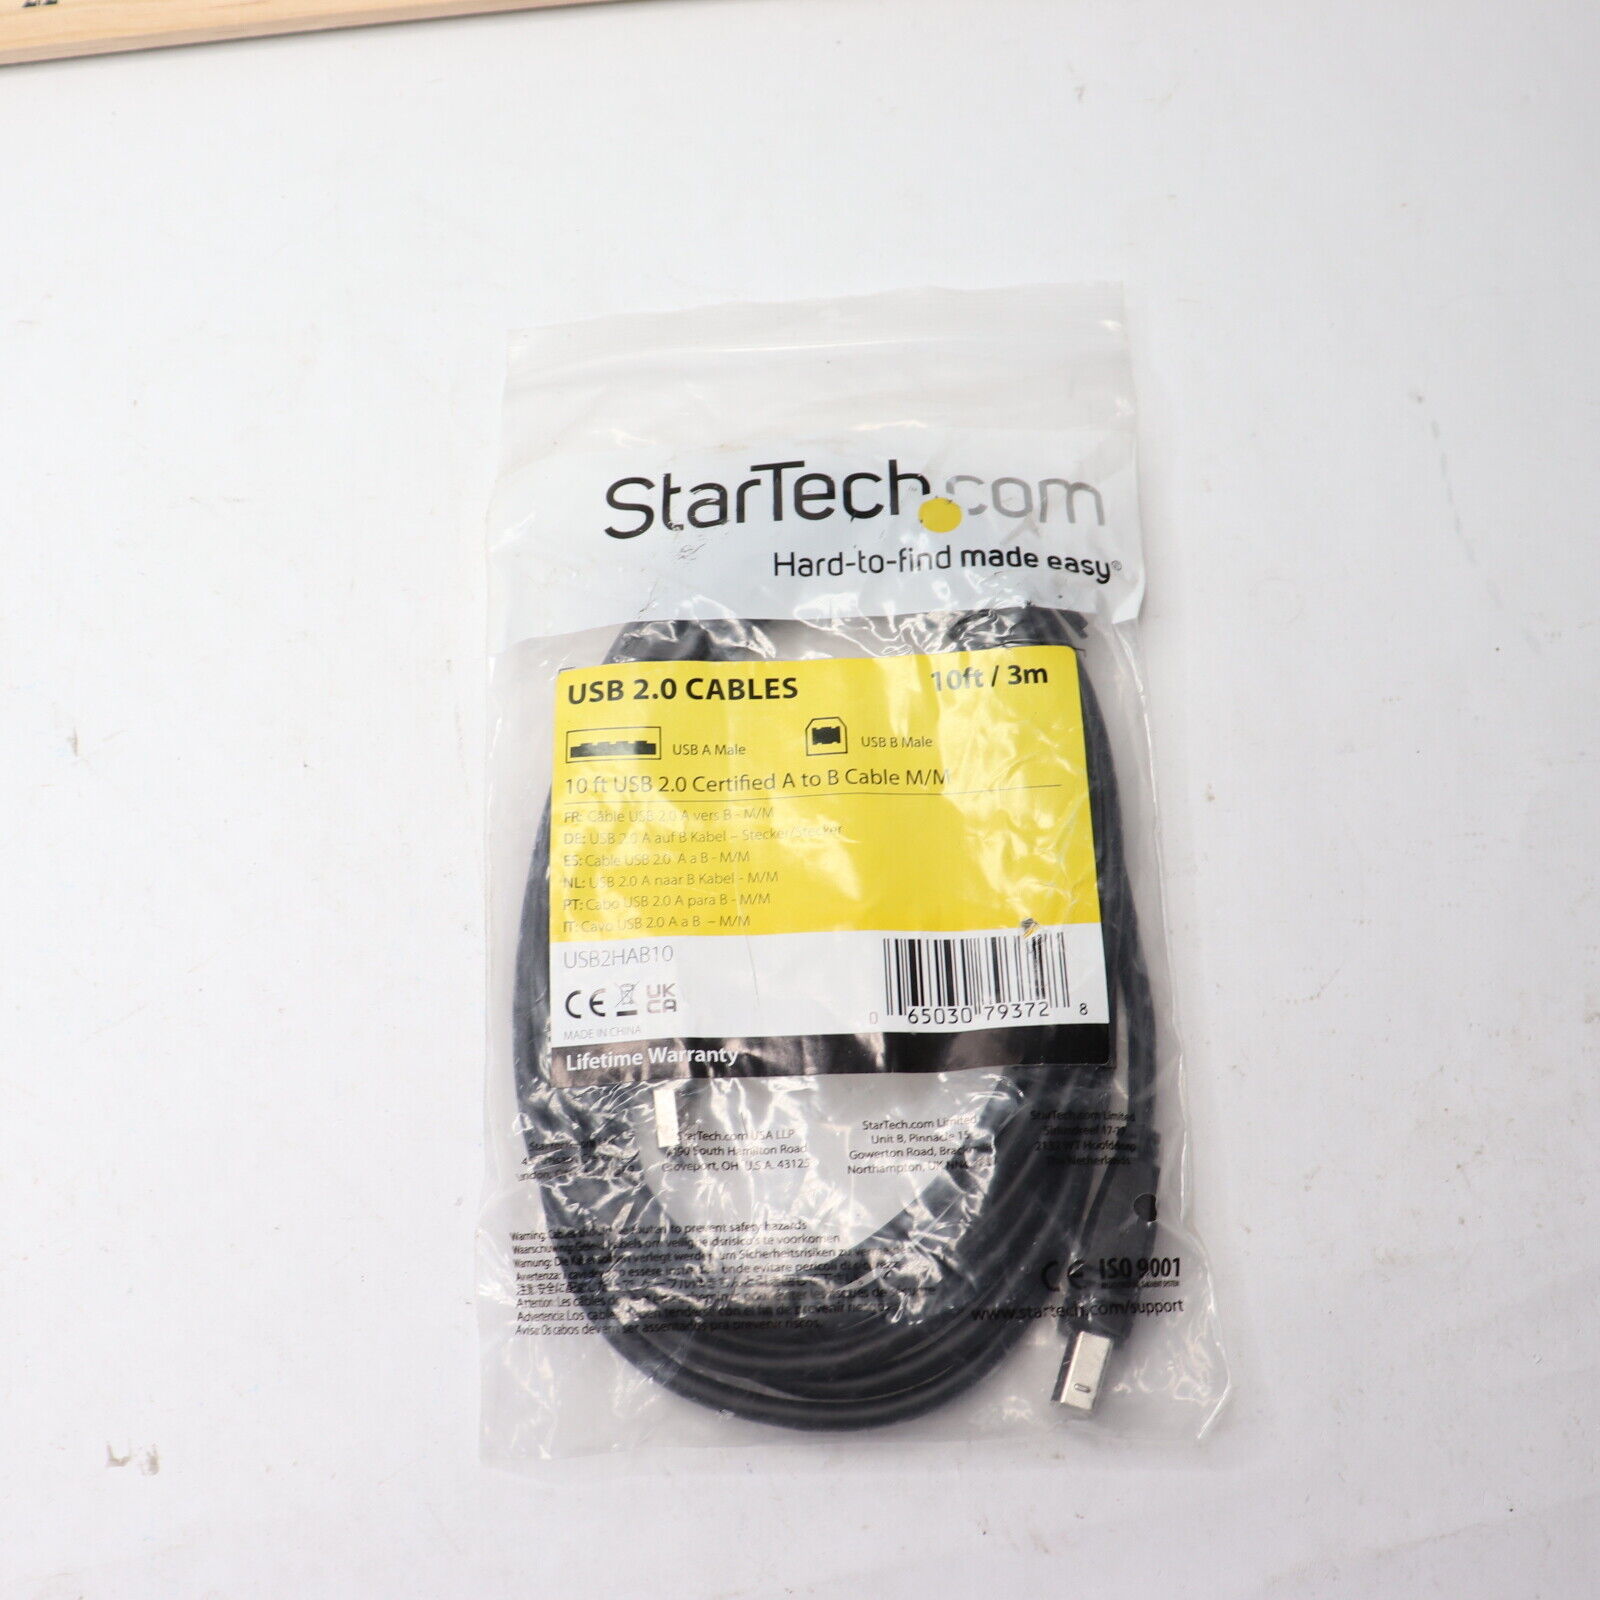 StarTech.Com Certified A to B Cable USB 2.0 M/M Black 10' USB2HAB10